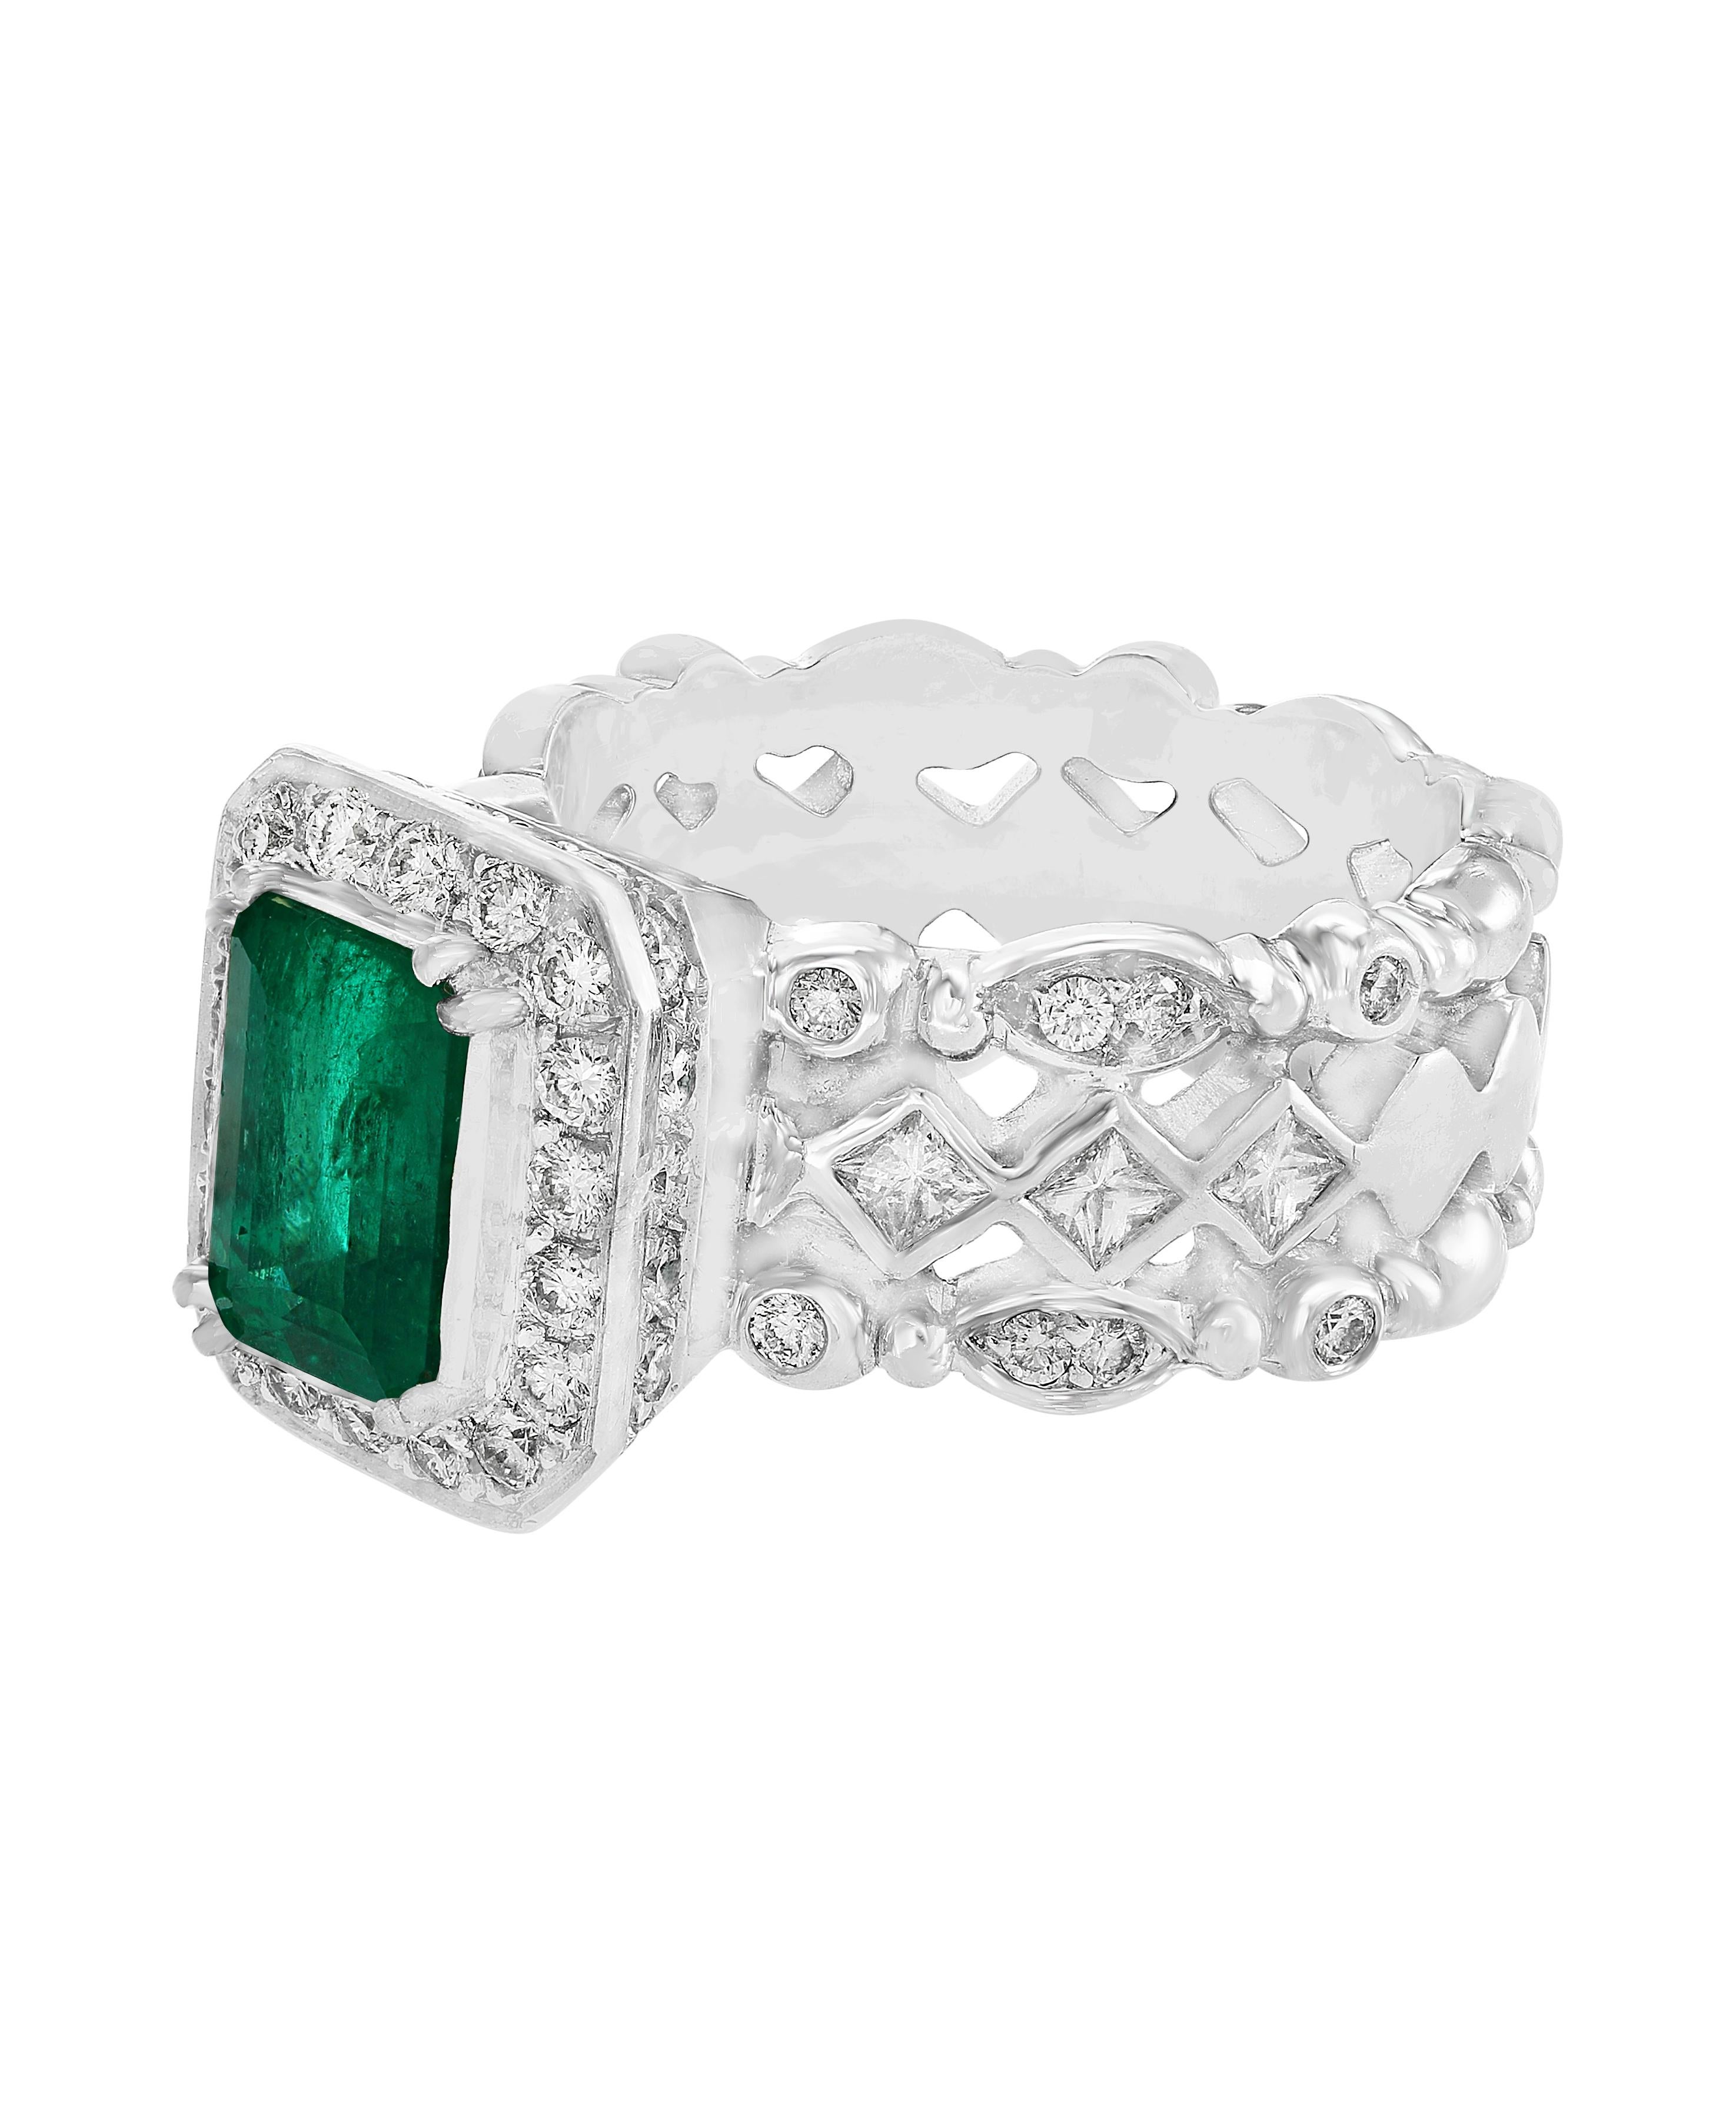 This is a classic Cocktail Designer ring created by Designer Doris Panos. It features a 2.0 Carat Colombian Emerald and Diamond Ring, Estate with no color enhancement. The ring is made of 18 Karat white gold and weighs 12.4 grams. The ring size is